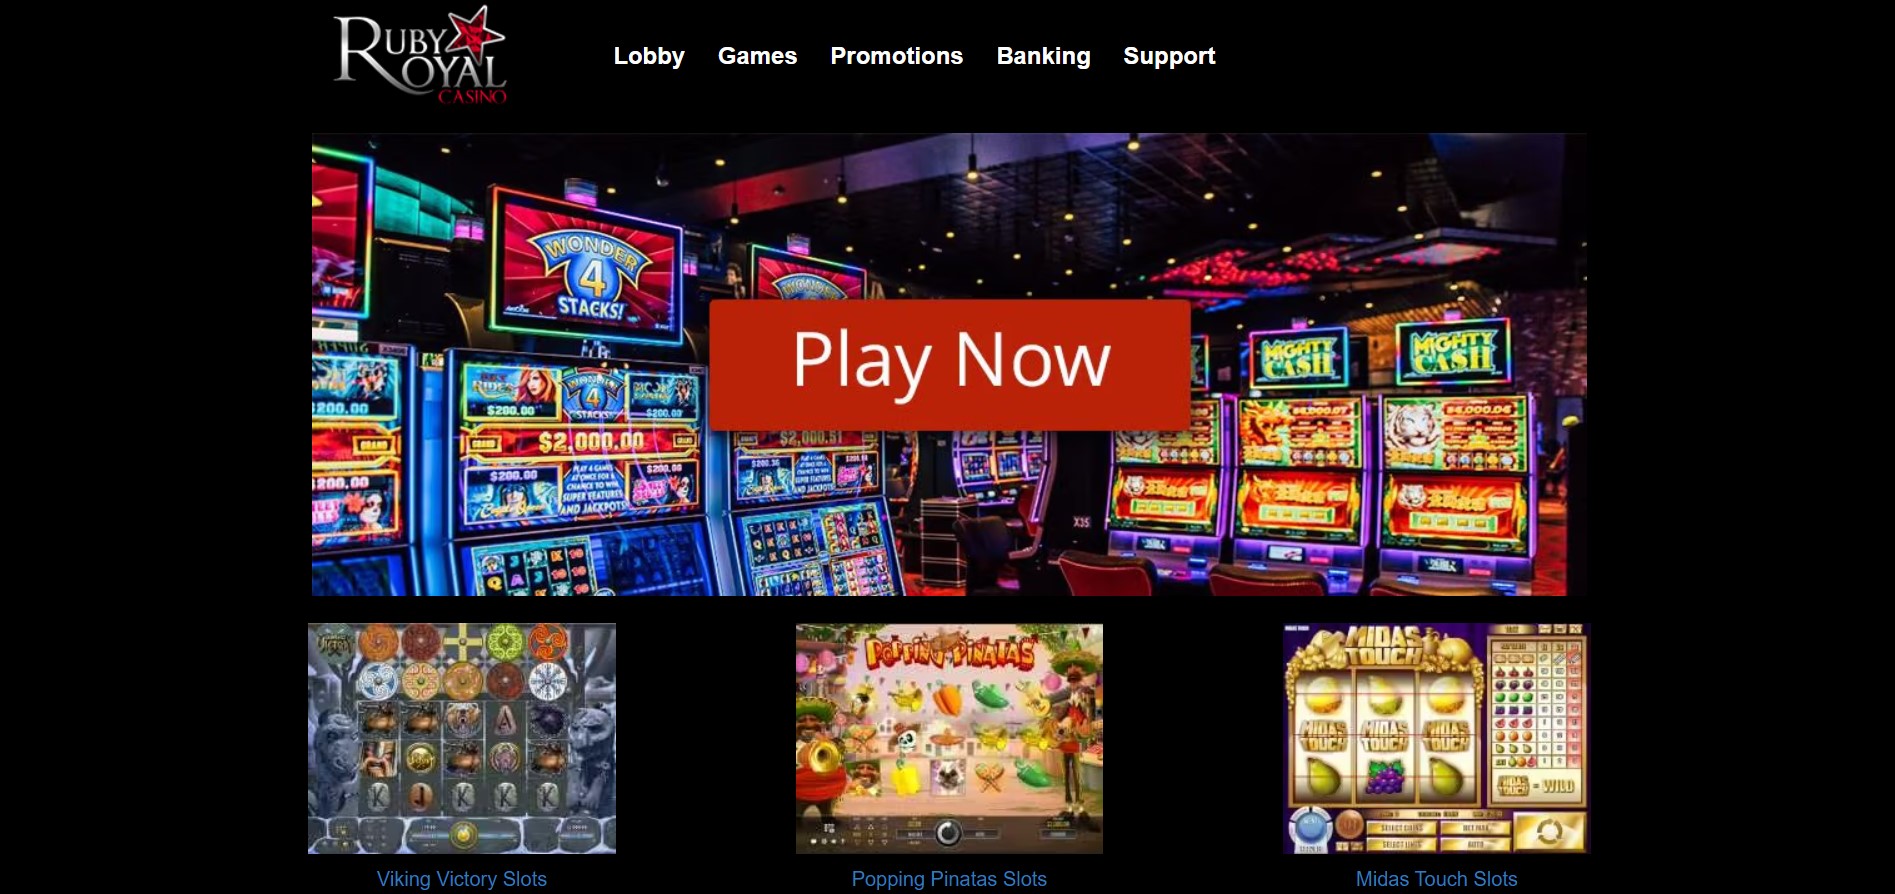 Ruby royal online casino review